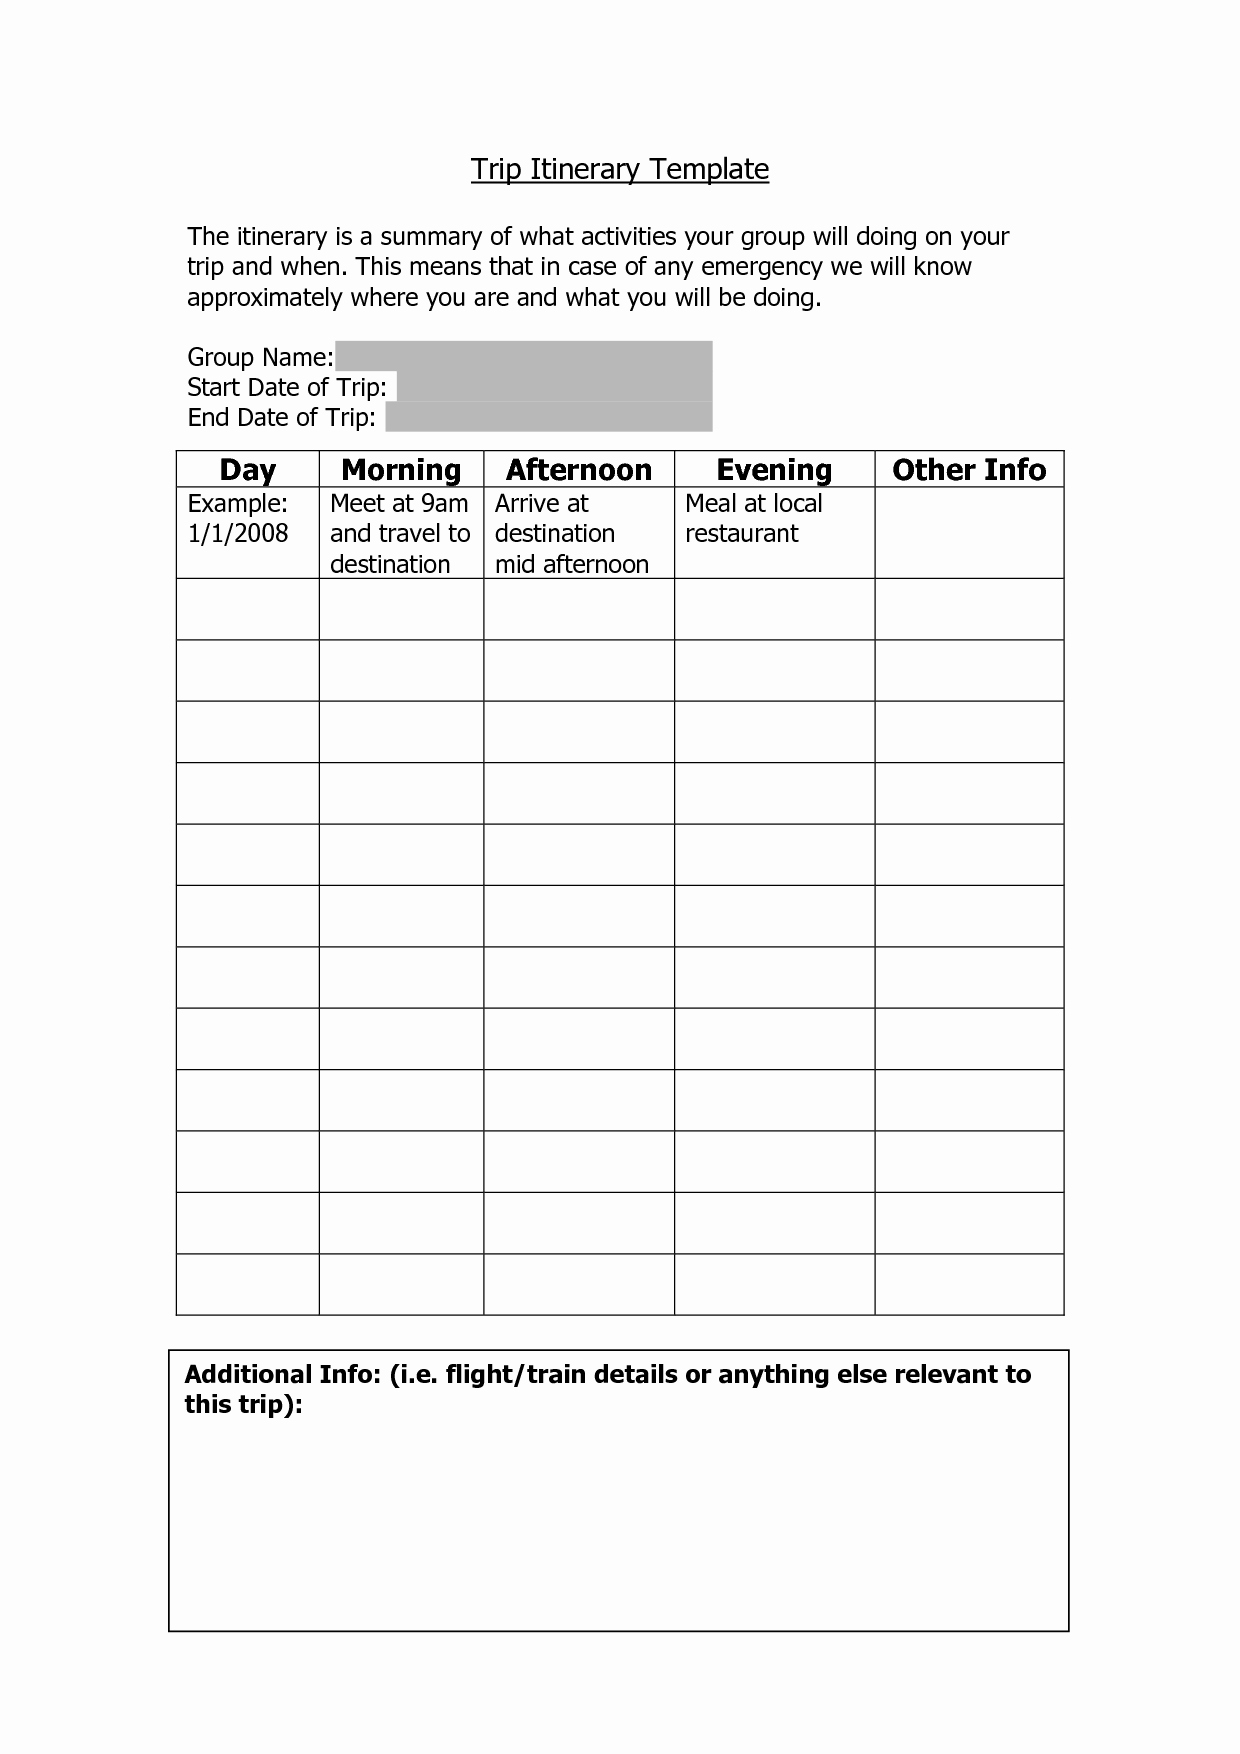 Travel Itinerary Planner Template Beautiful Vacation Itenerary Template Trip Itinerary Template